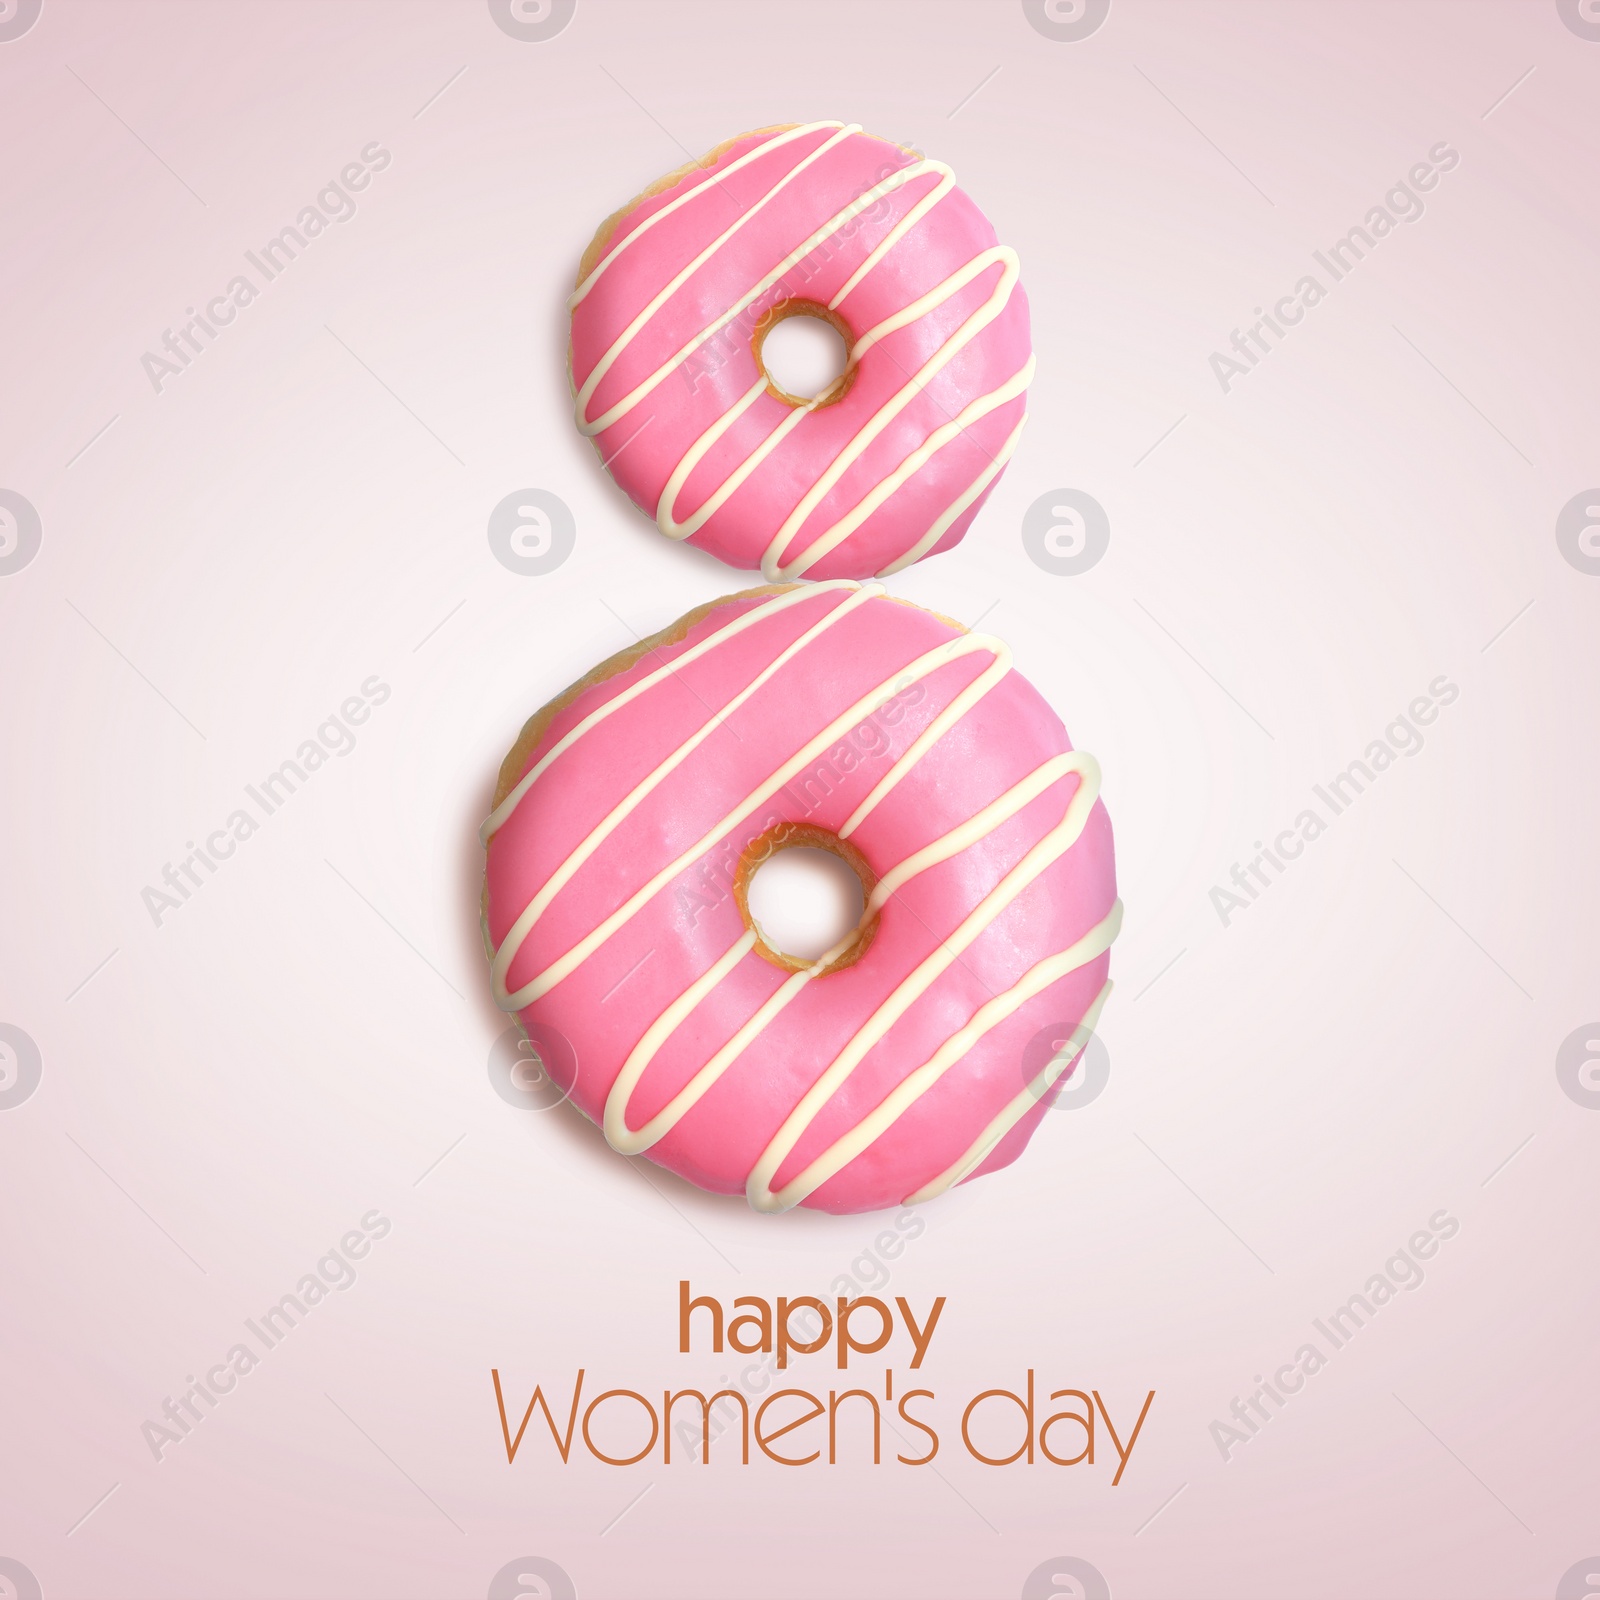 Image of 8 March - Happy International Women's Day. Card design with shape of number eight made of doughnuts on pink background, top view